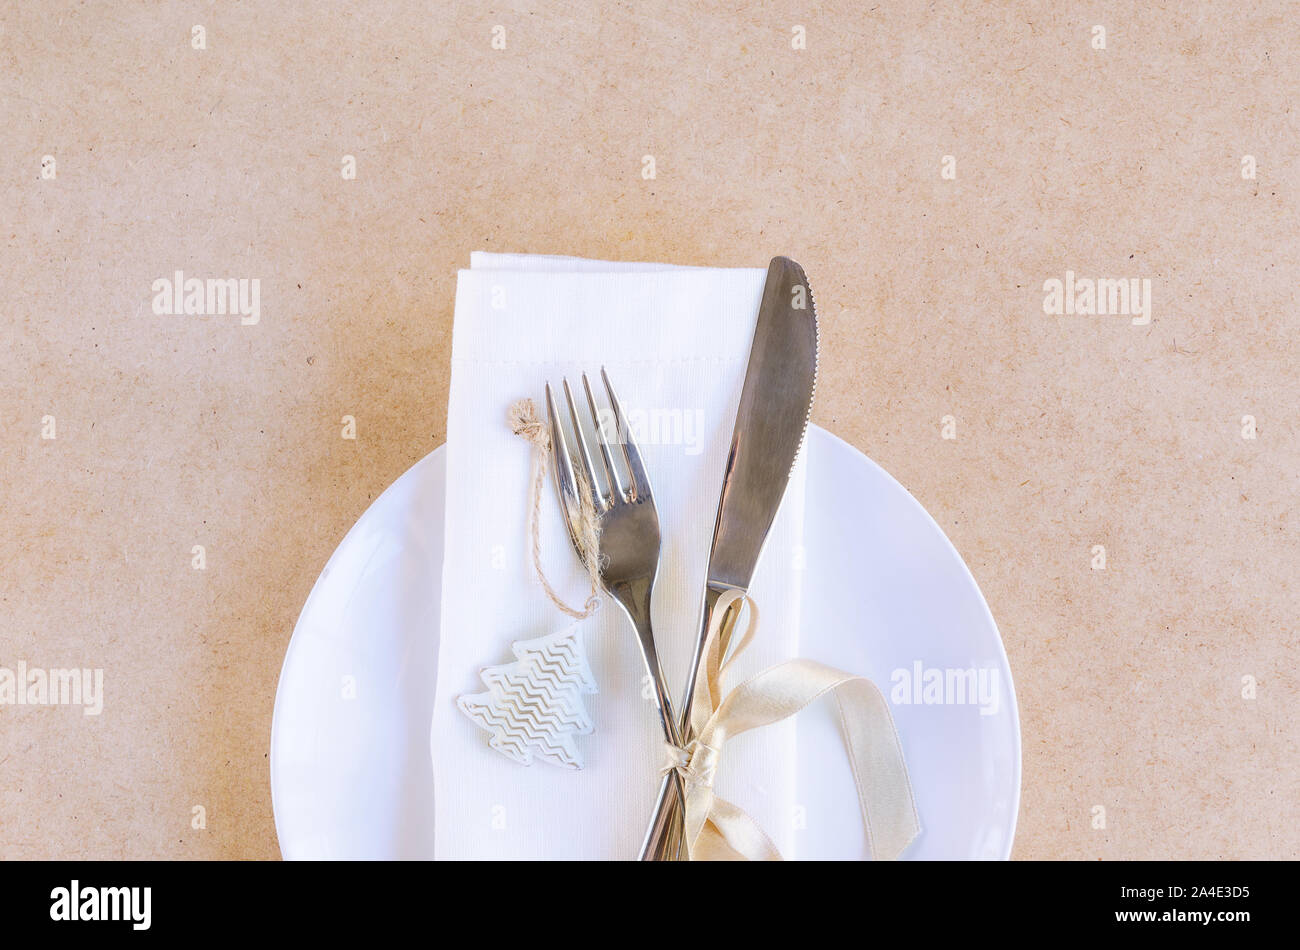 Beautiful Decoration For Festive Dinner In Beige White Tone Christmas Table Settings White Napkin With Silver Cutlery And Christmas Tree Toy On Cra Stock Photo Alamy